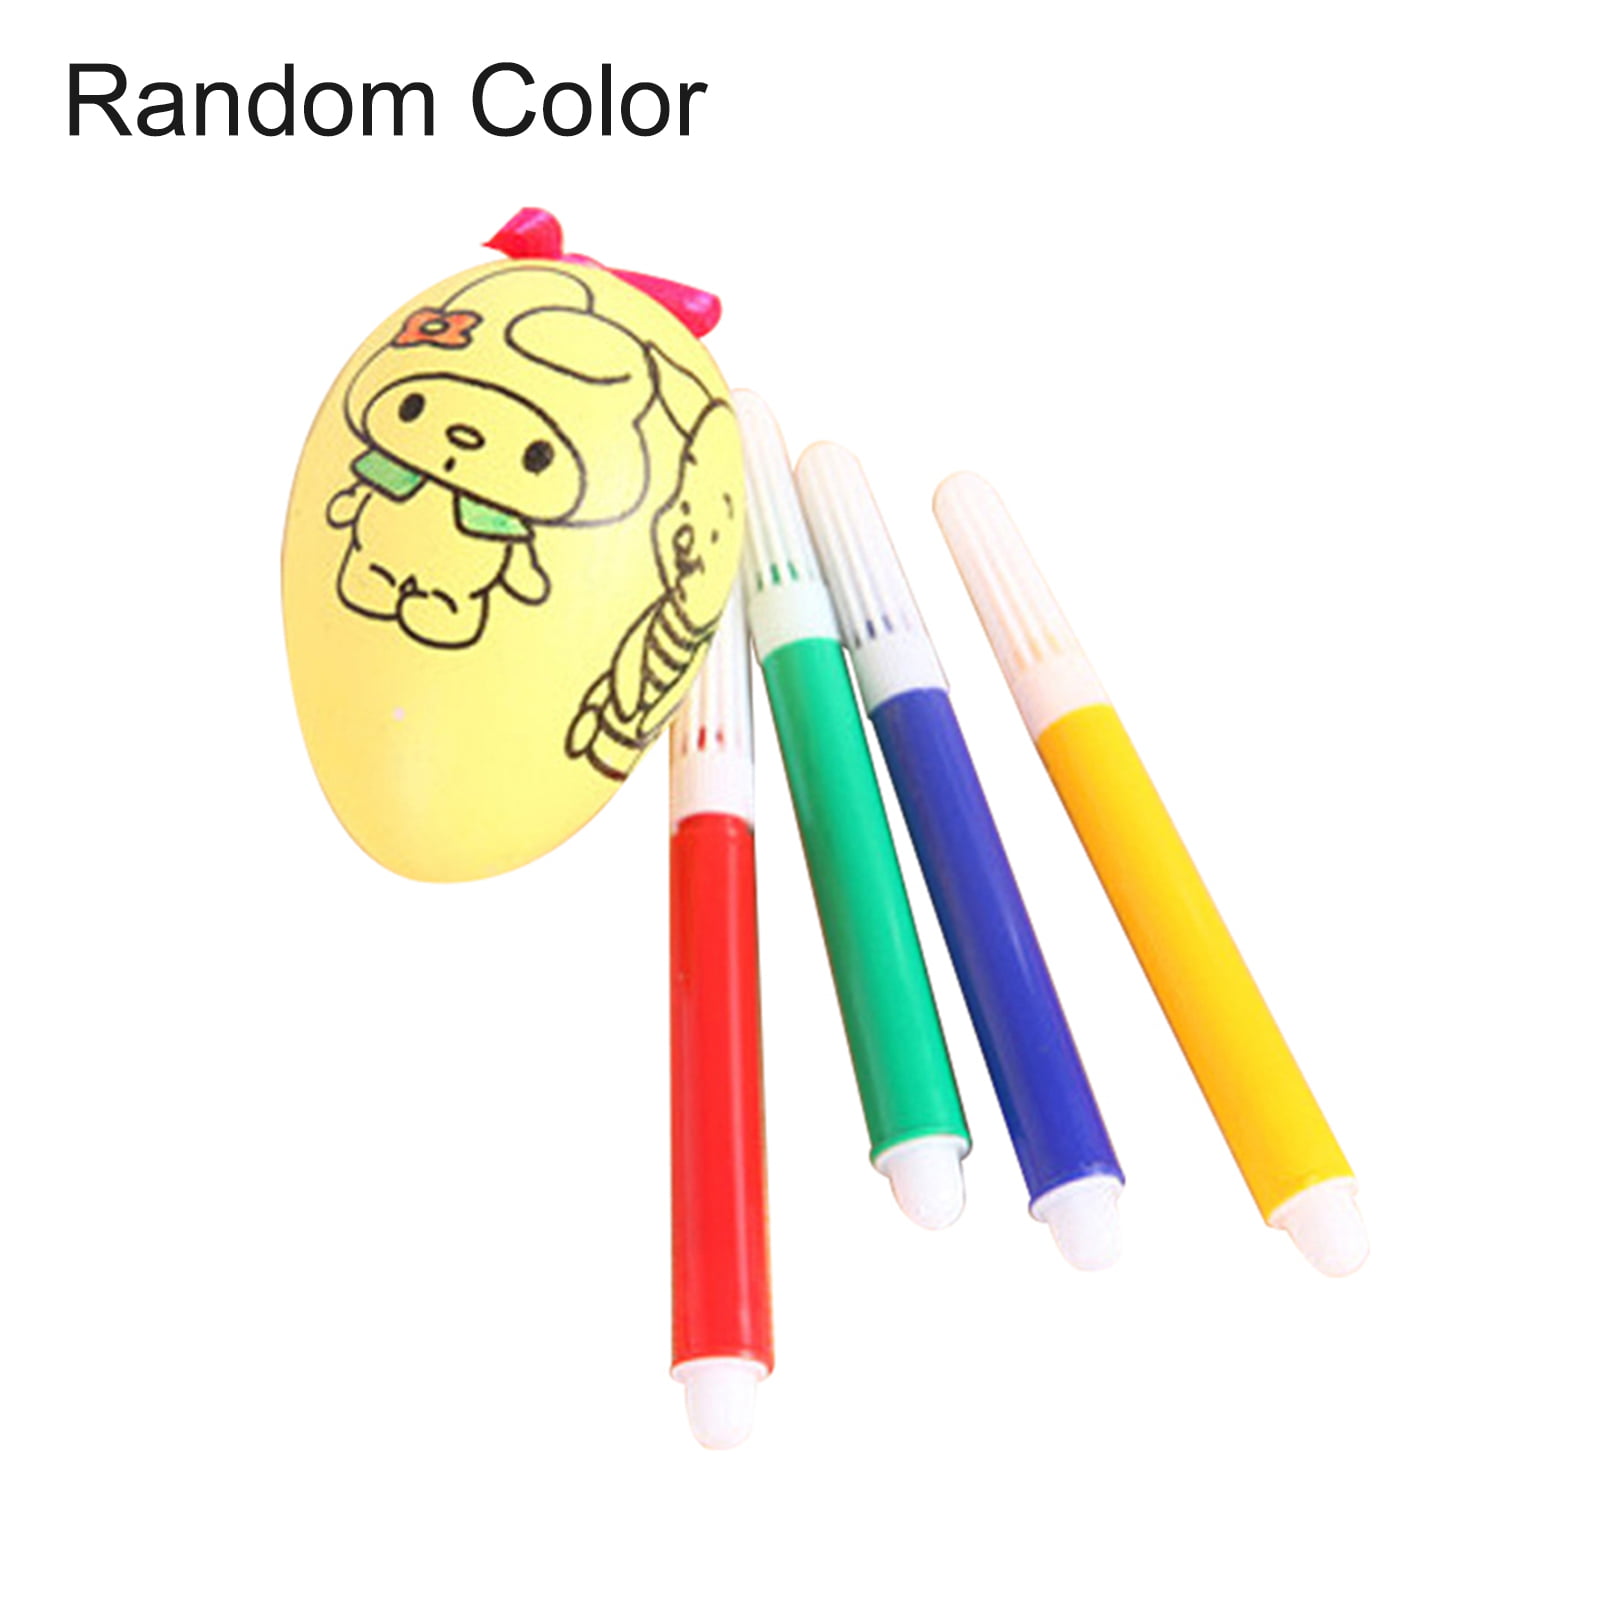 JYC Store 2019 Novelty Water Color Pen & Egg Kids DIY Painting Color Egg Toy Easter Egg Education Toys